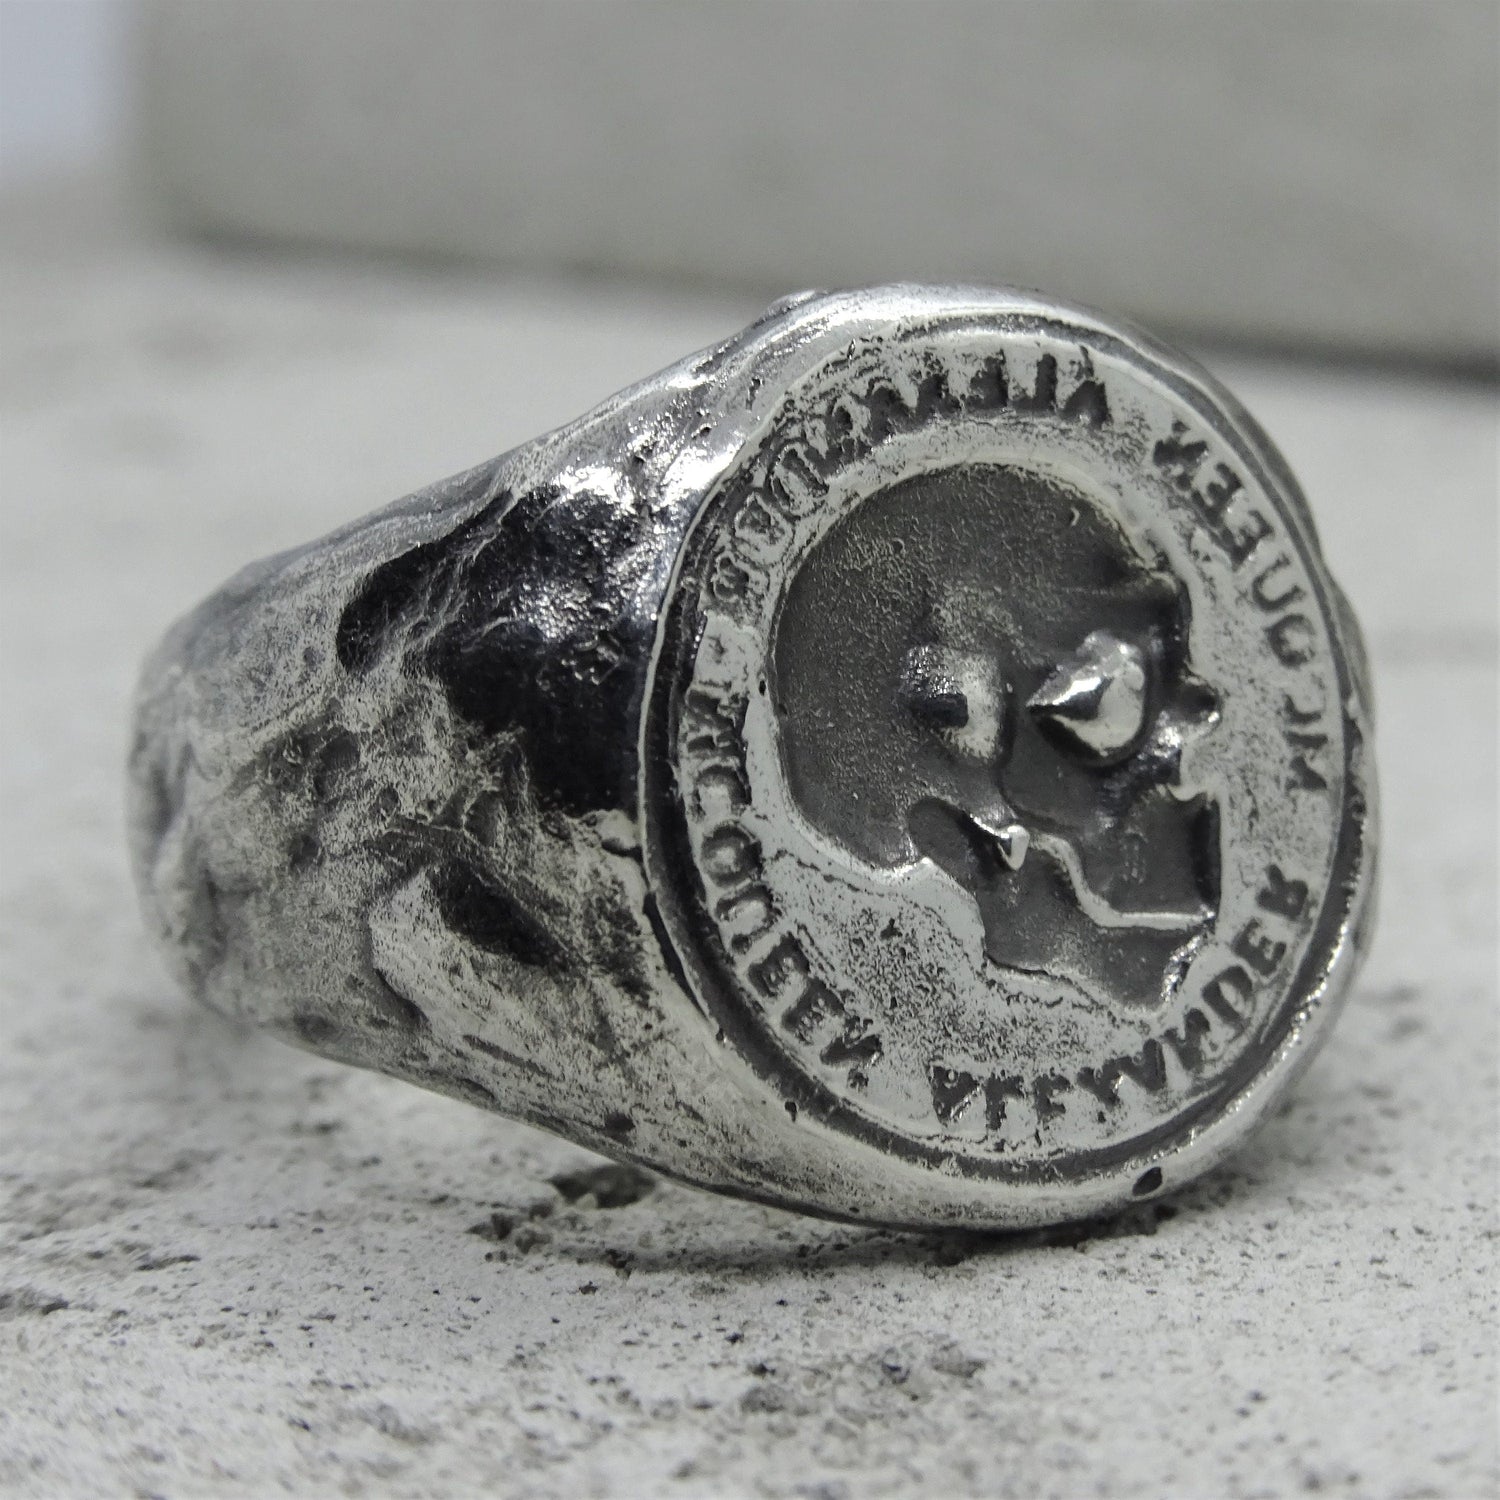 McQ ring- signet ring with light texture and skull imprint Signet rings Project50g 